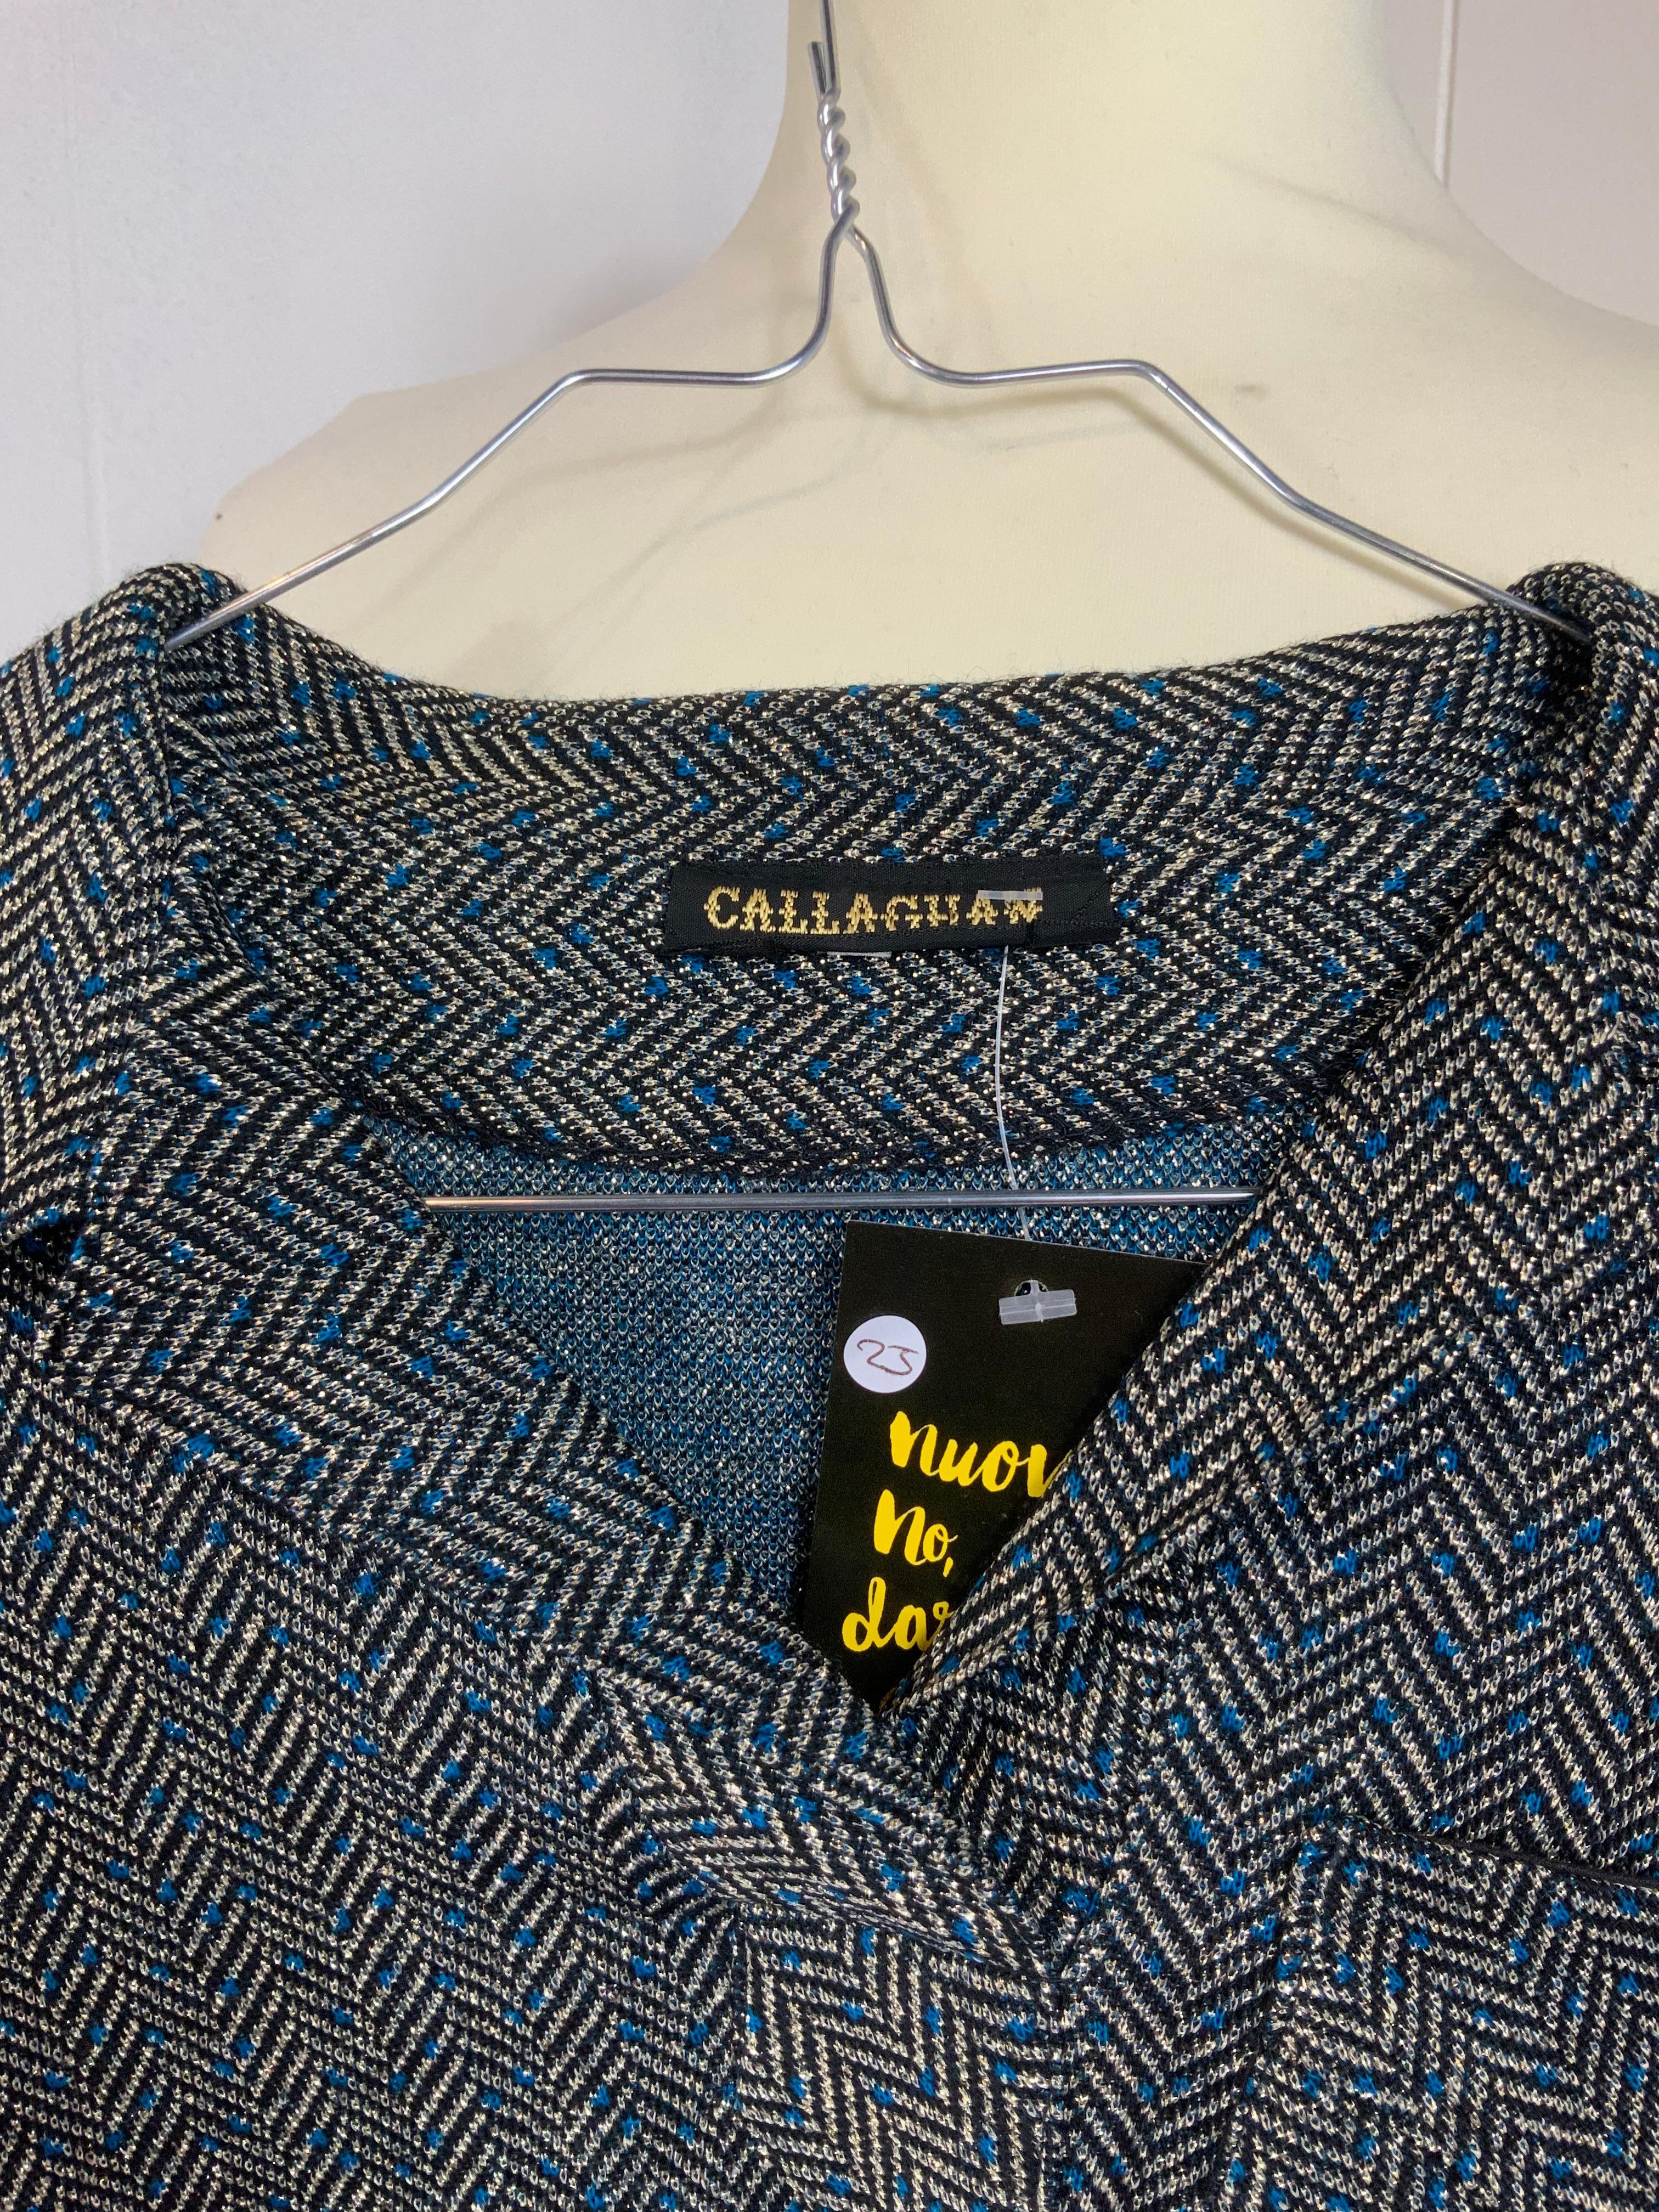 Callaghan lurex and wool jumper by Gianni Versace For Sale 1